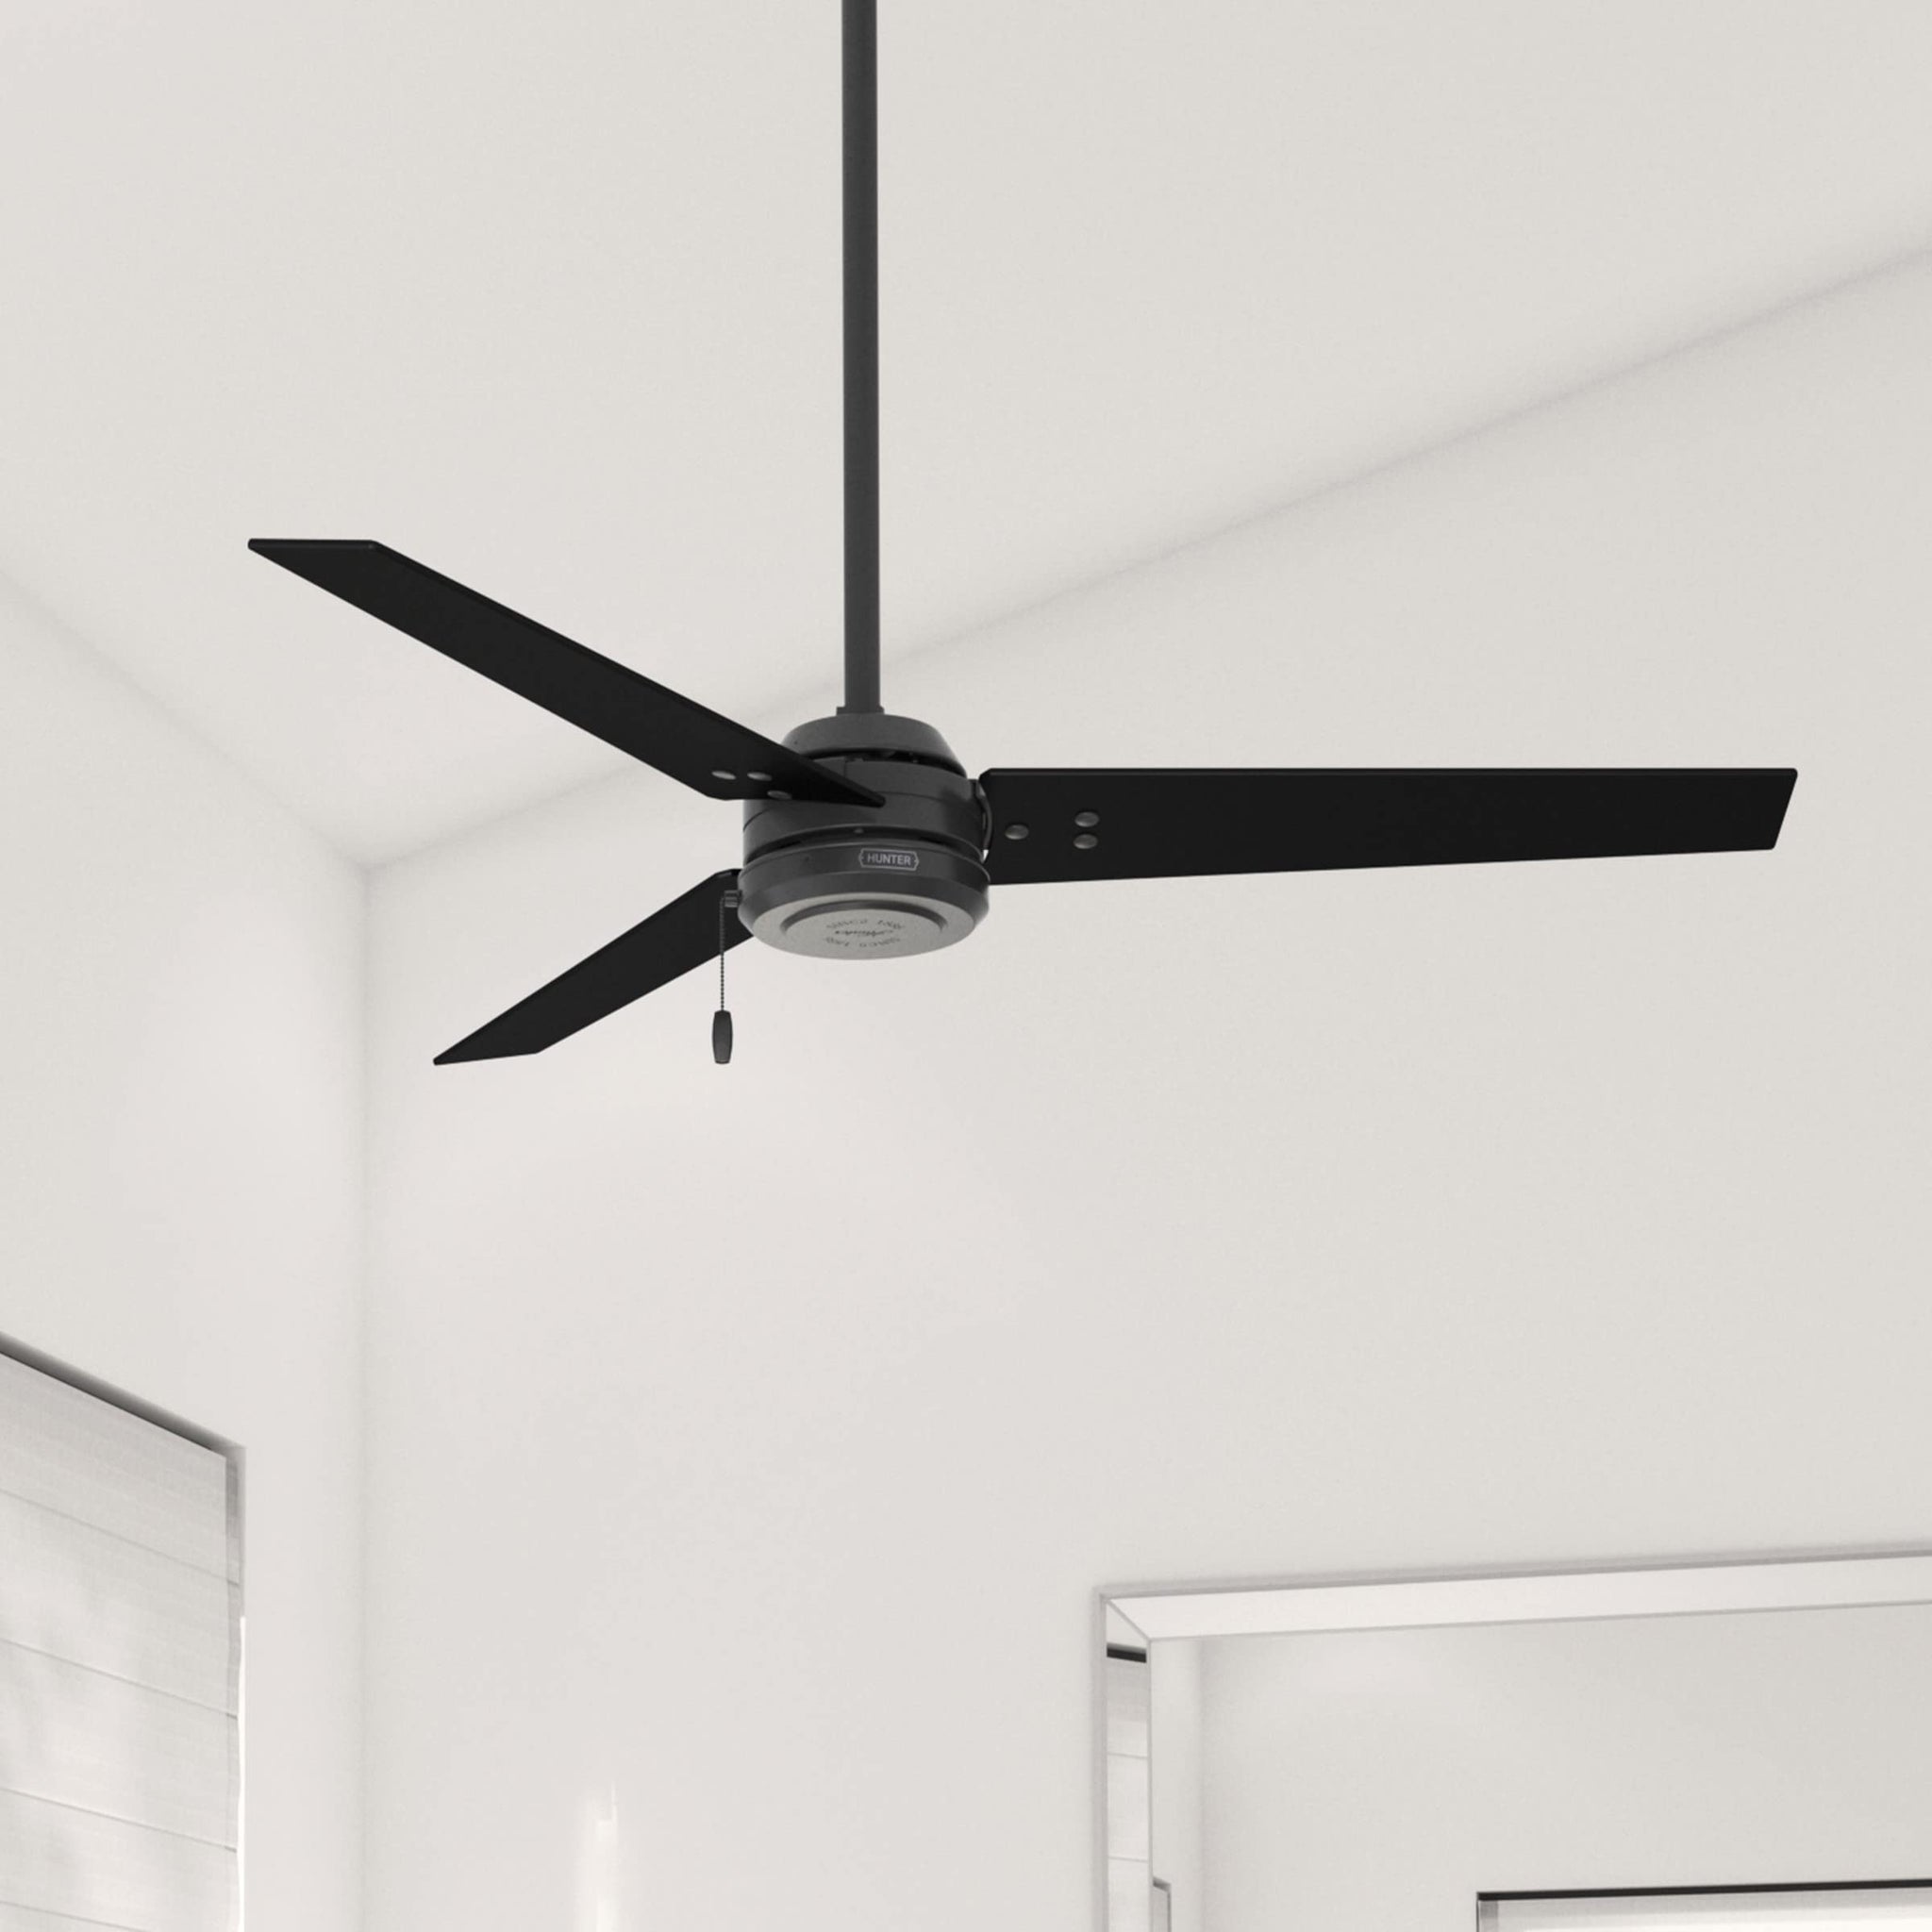 Hunter Cassius Indoor / Outdoor Ceiling Fan with Pull Chain Control, 52", Matte Black